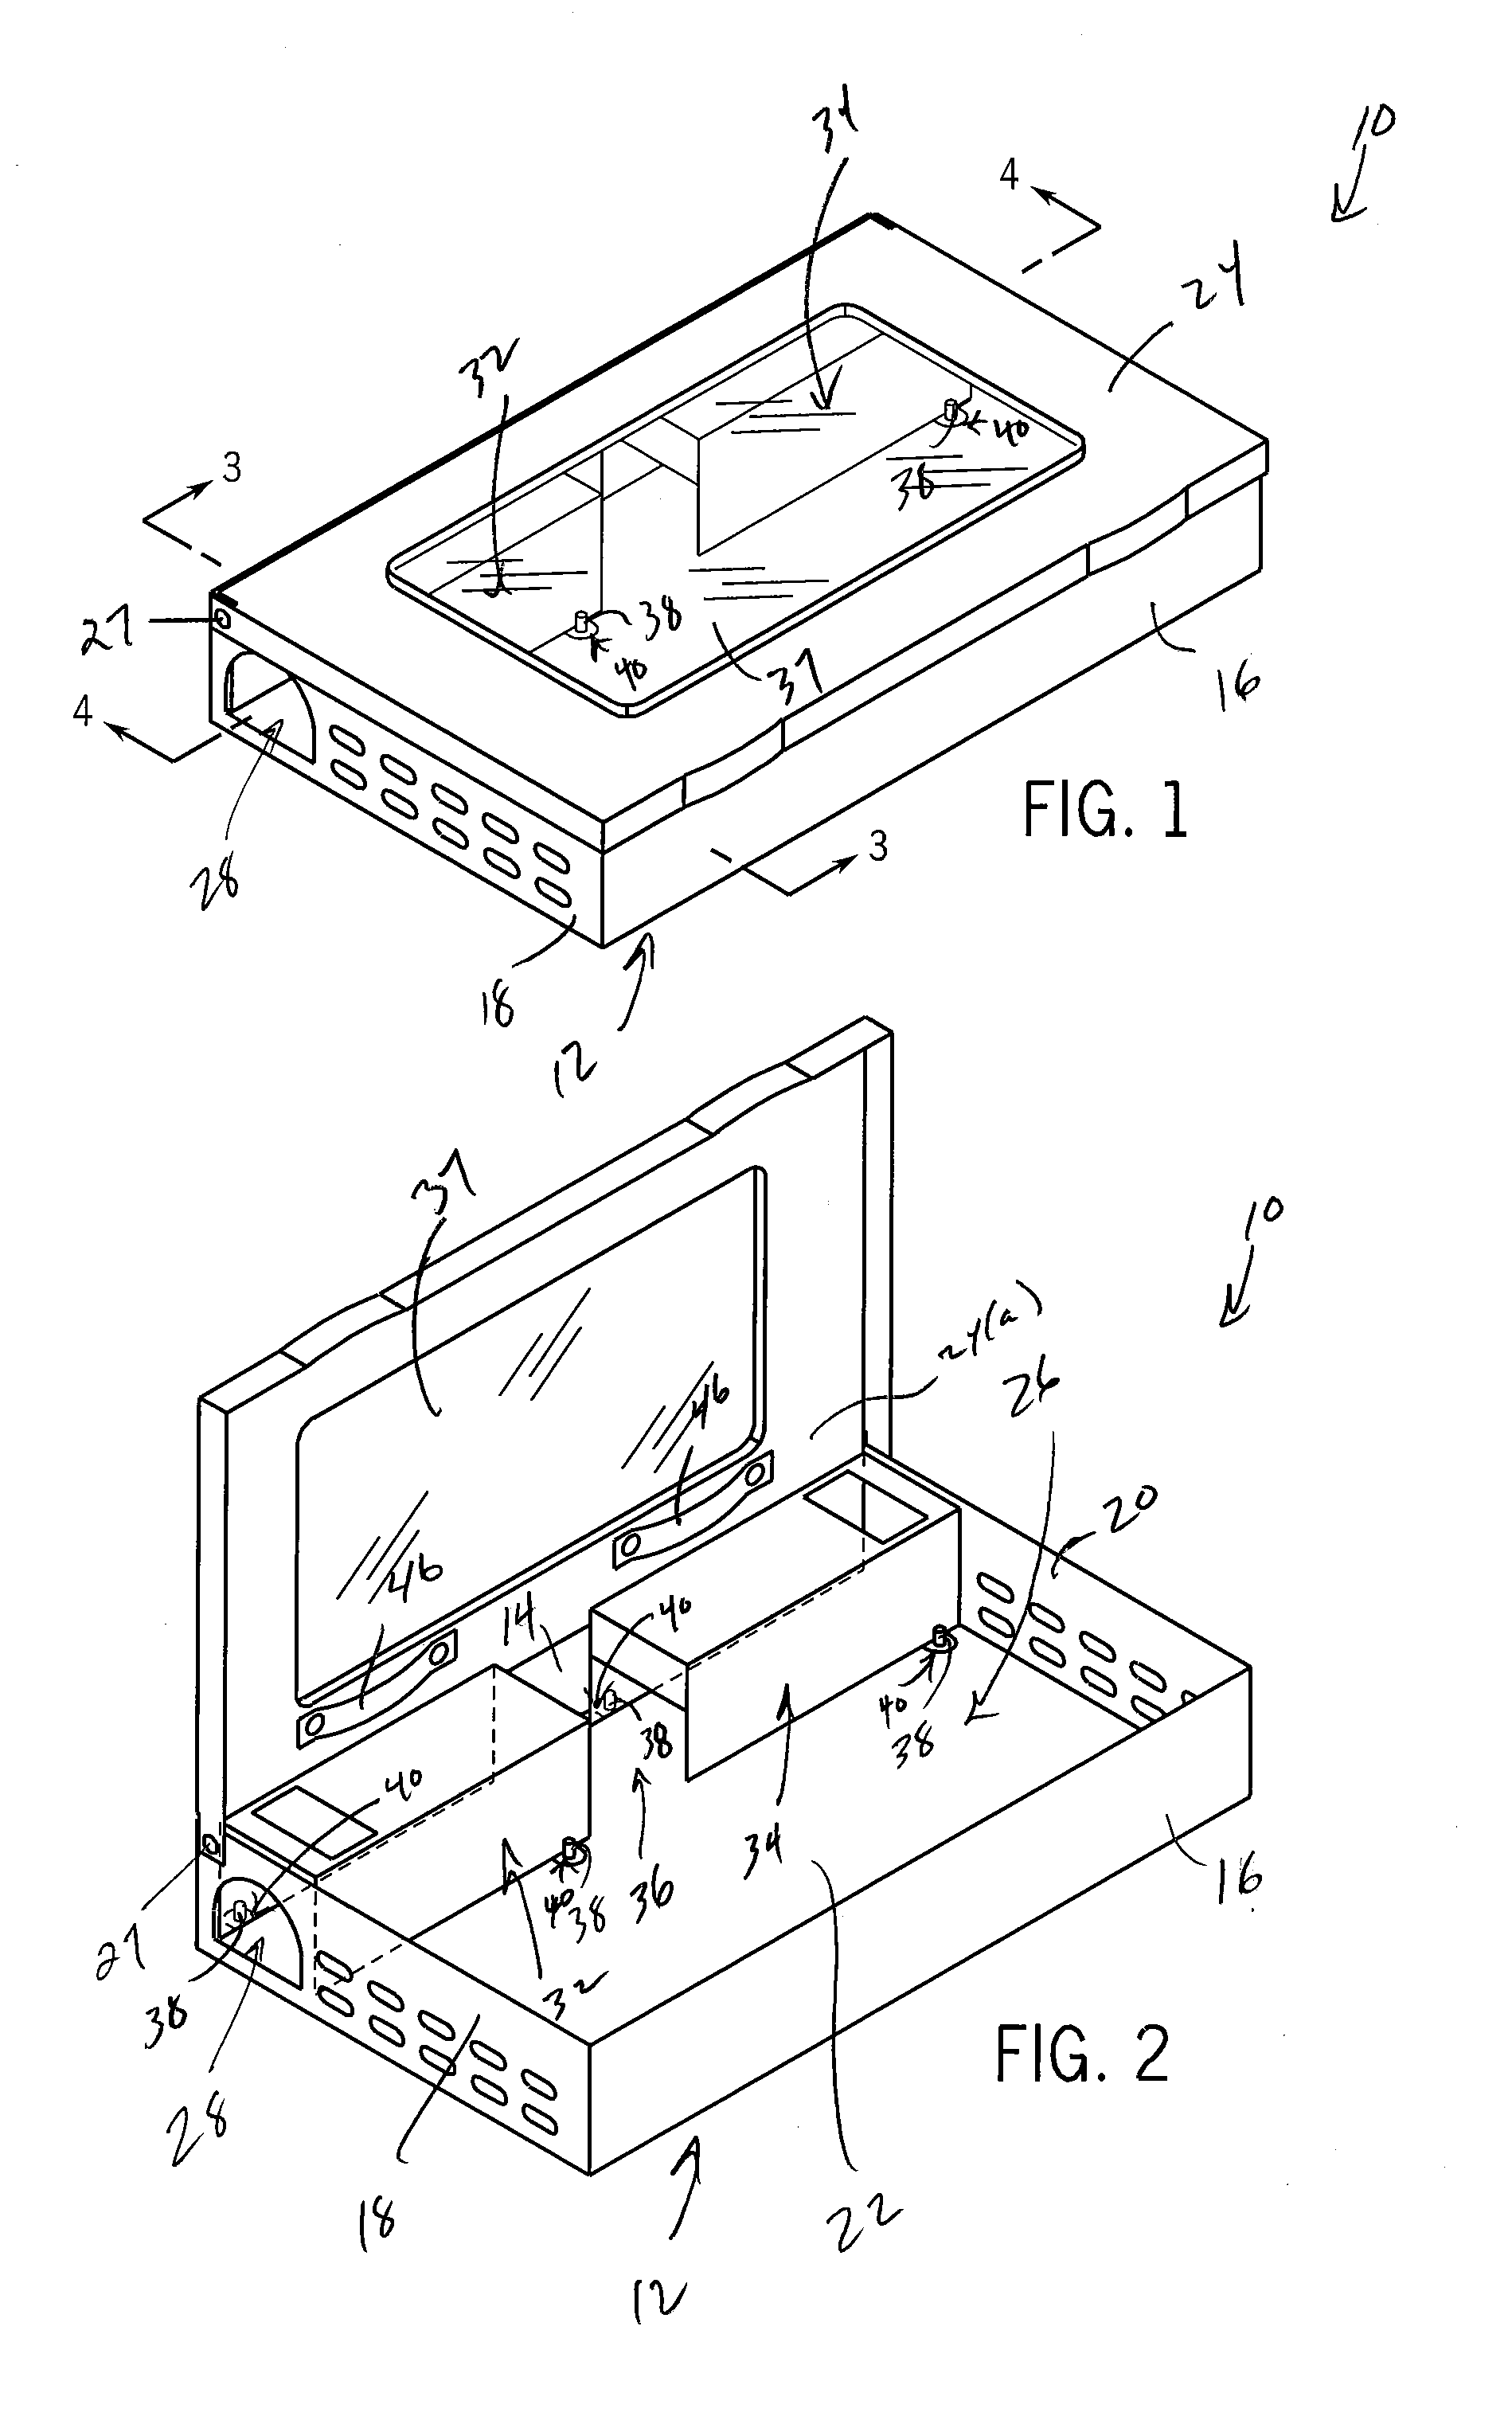 Repeating Animal Capture and Containment System Having Removable Trapping Devices